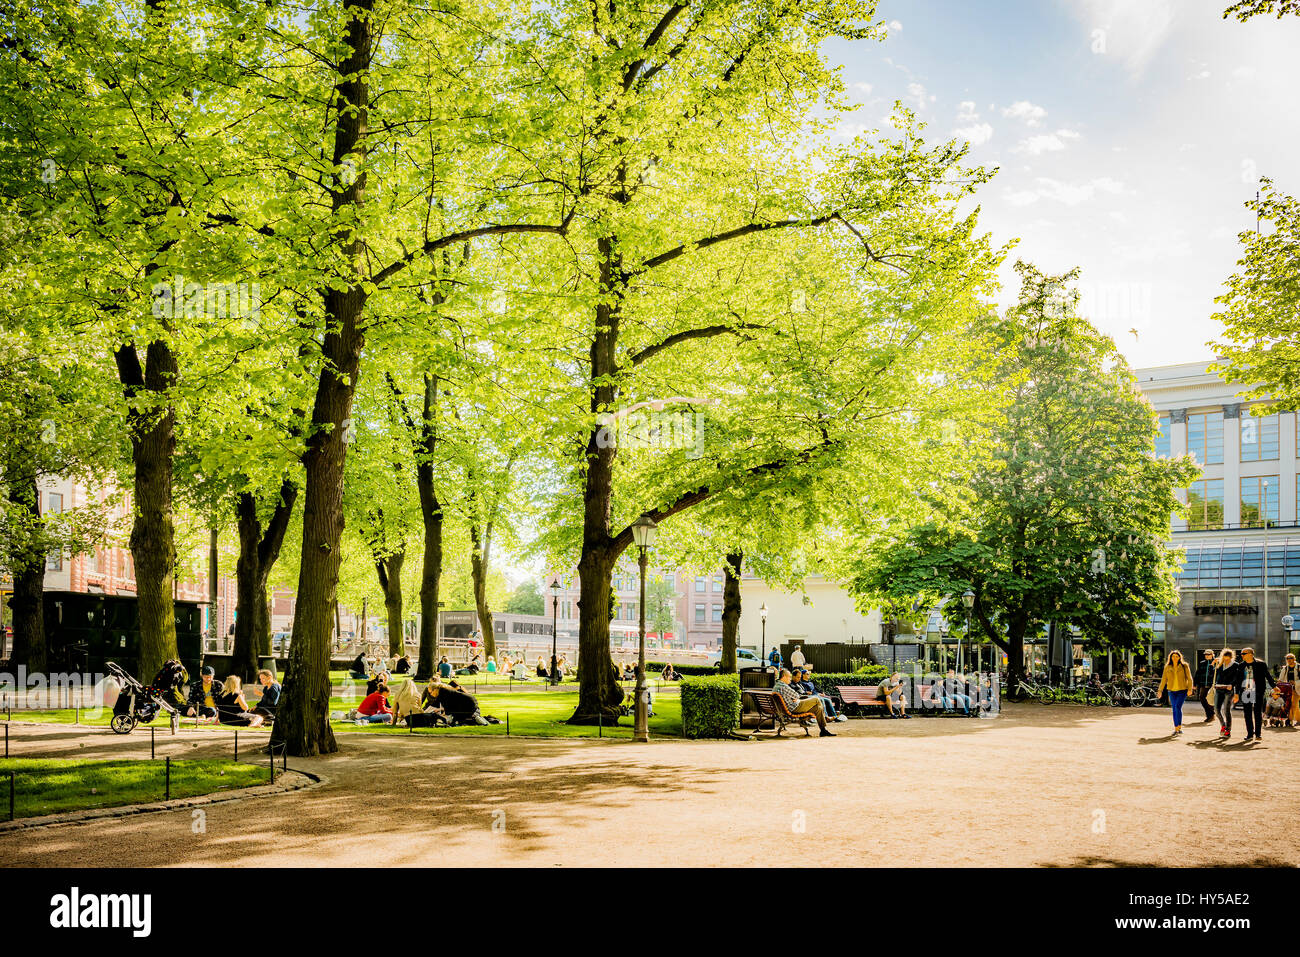 Finland, Uusimaa, Helsinki, City park in summer with people sitting on grass Stock Photo